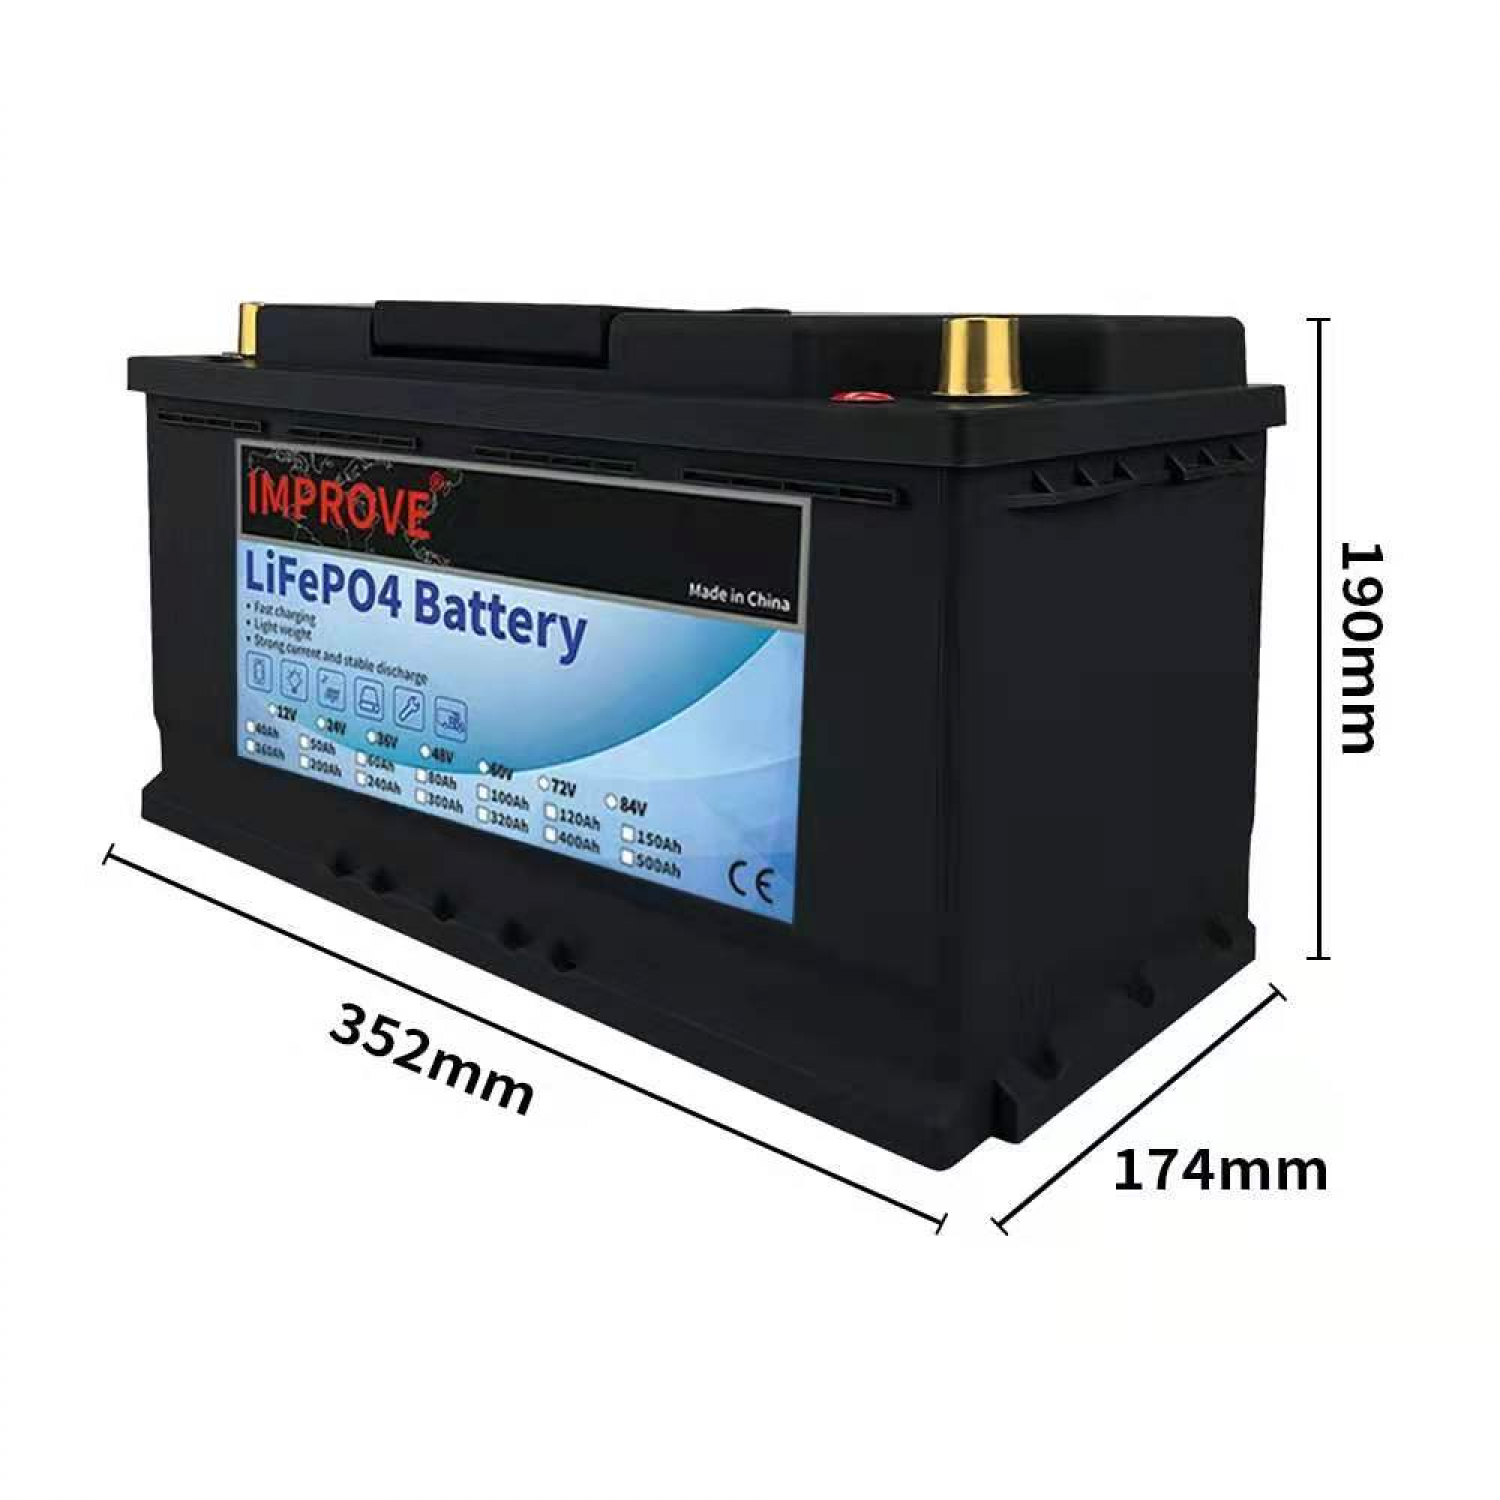 How to Choose the Best Lifepo4 Battery 12v 100ah?--IMPROVE BATTERY